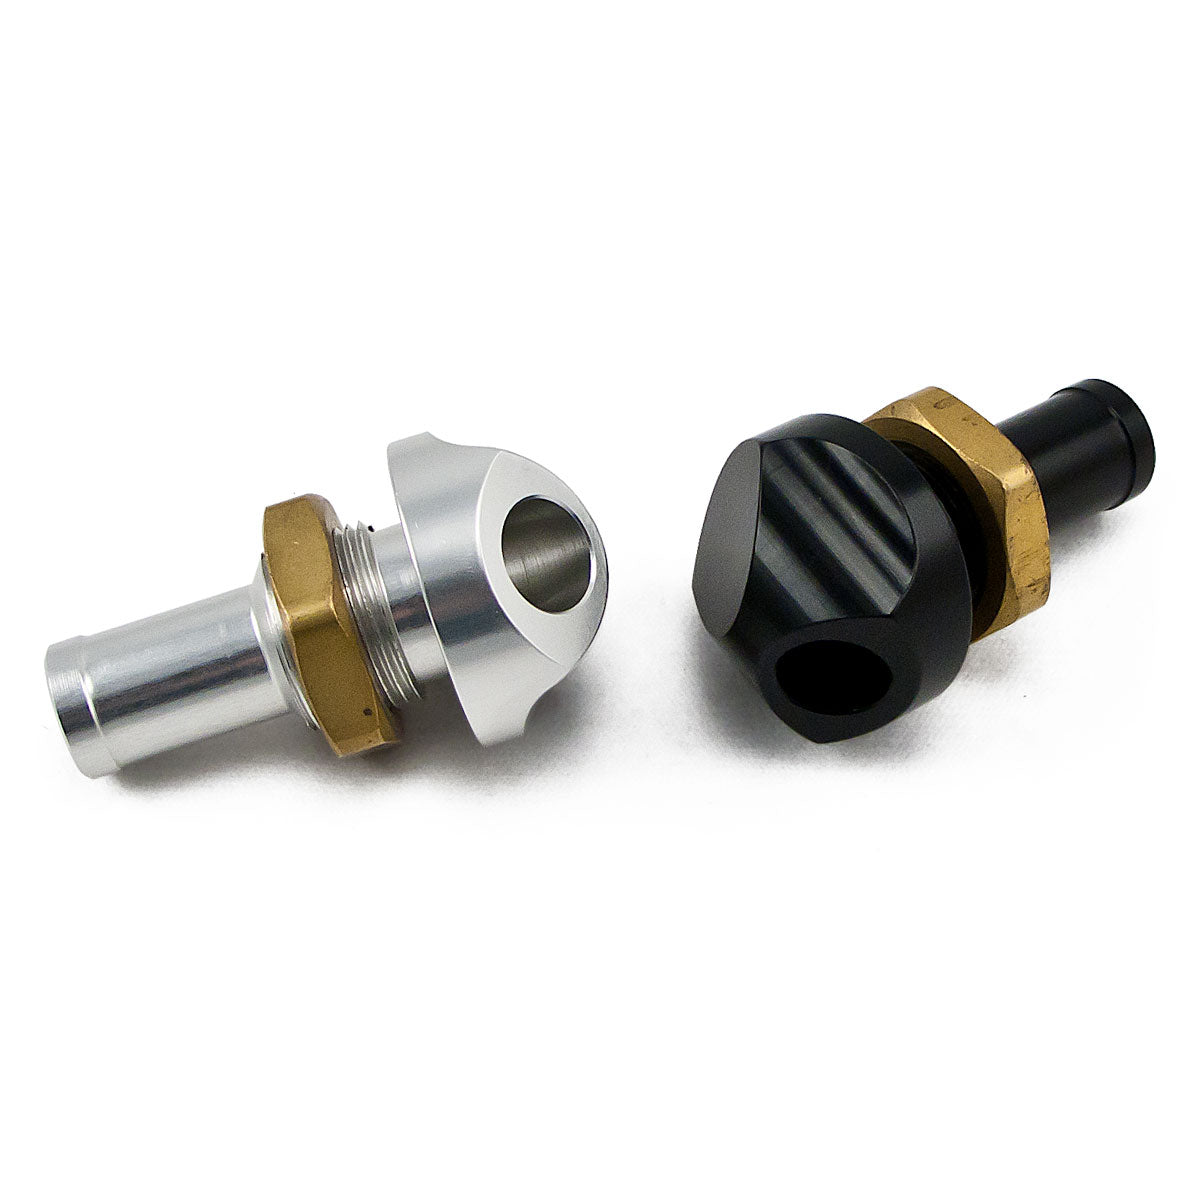 ADA Racing 1/2" 45 degree Bypass Fitting